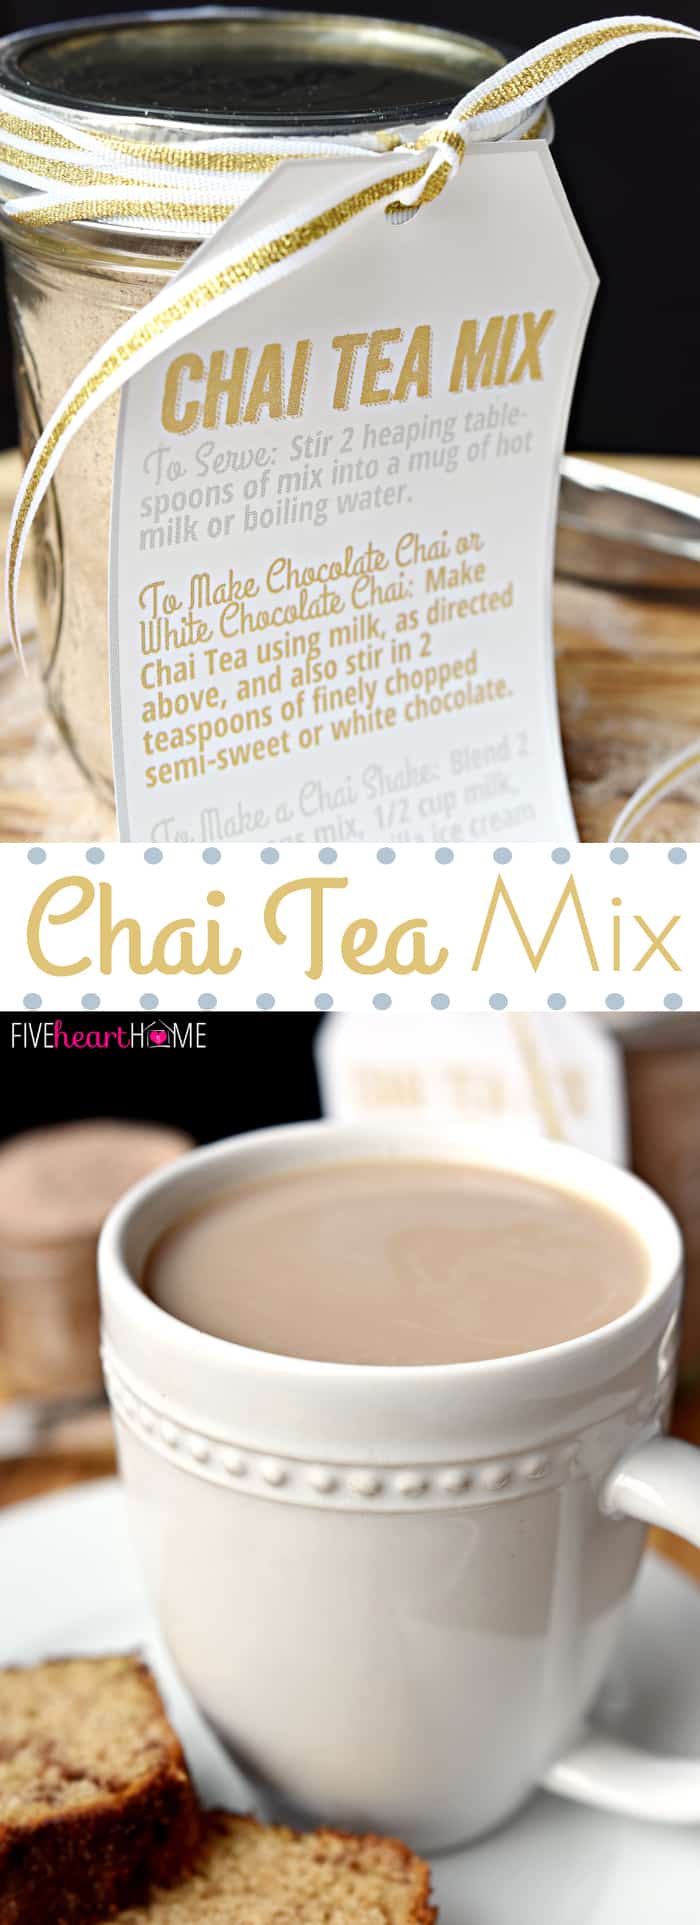 Chai Tea Mix ~ a unique homemade food gift for those who love Chai Tea, use this mix to whip up everything from lattes to milkshakes! Also include a free printable tag with directions for gift giving. | FiveHeartHome.com via @fivehearthome